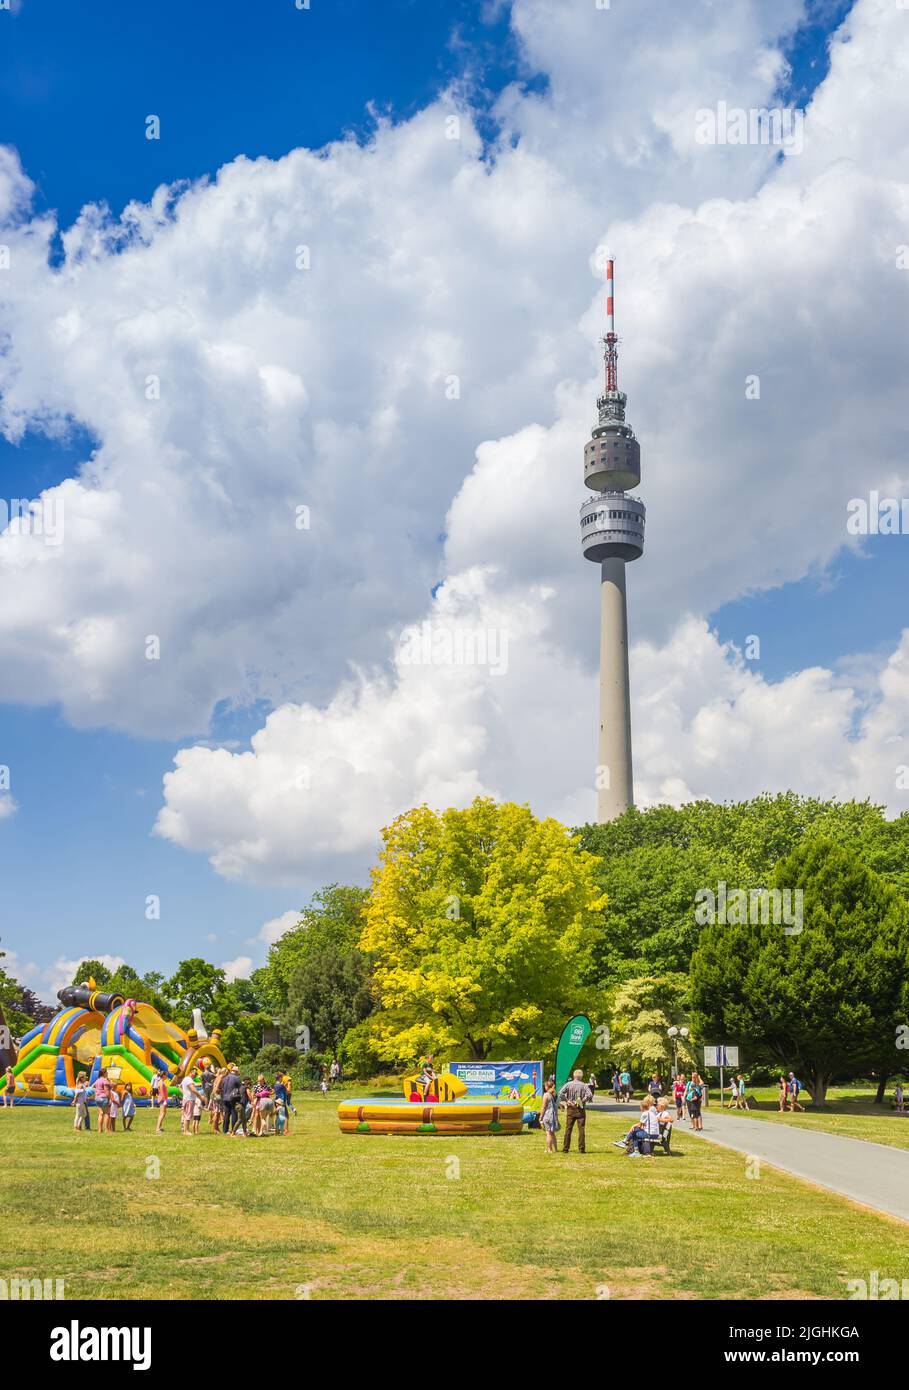 Playground in front of the Florian tower in the Westfalen park of Dortmund, Germany Stock Photo